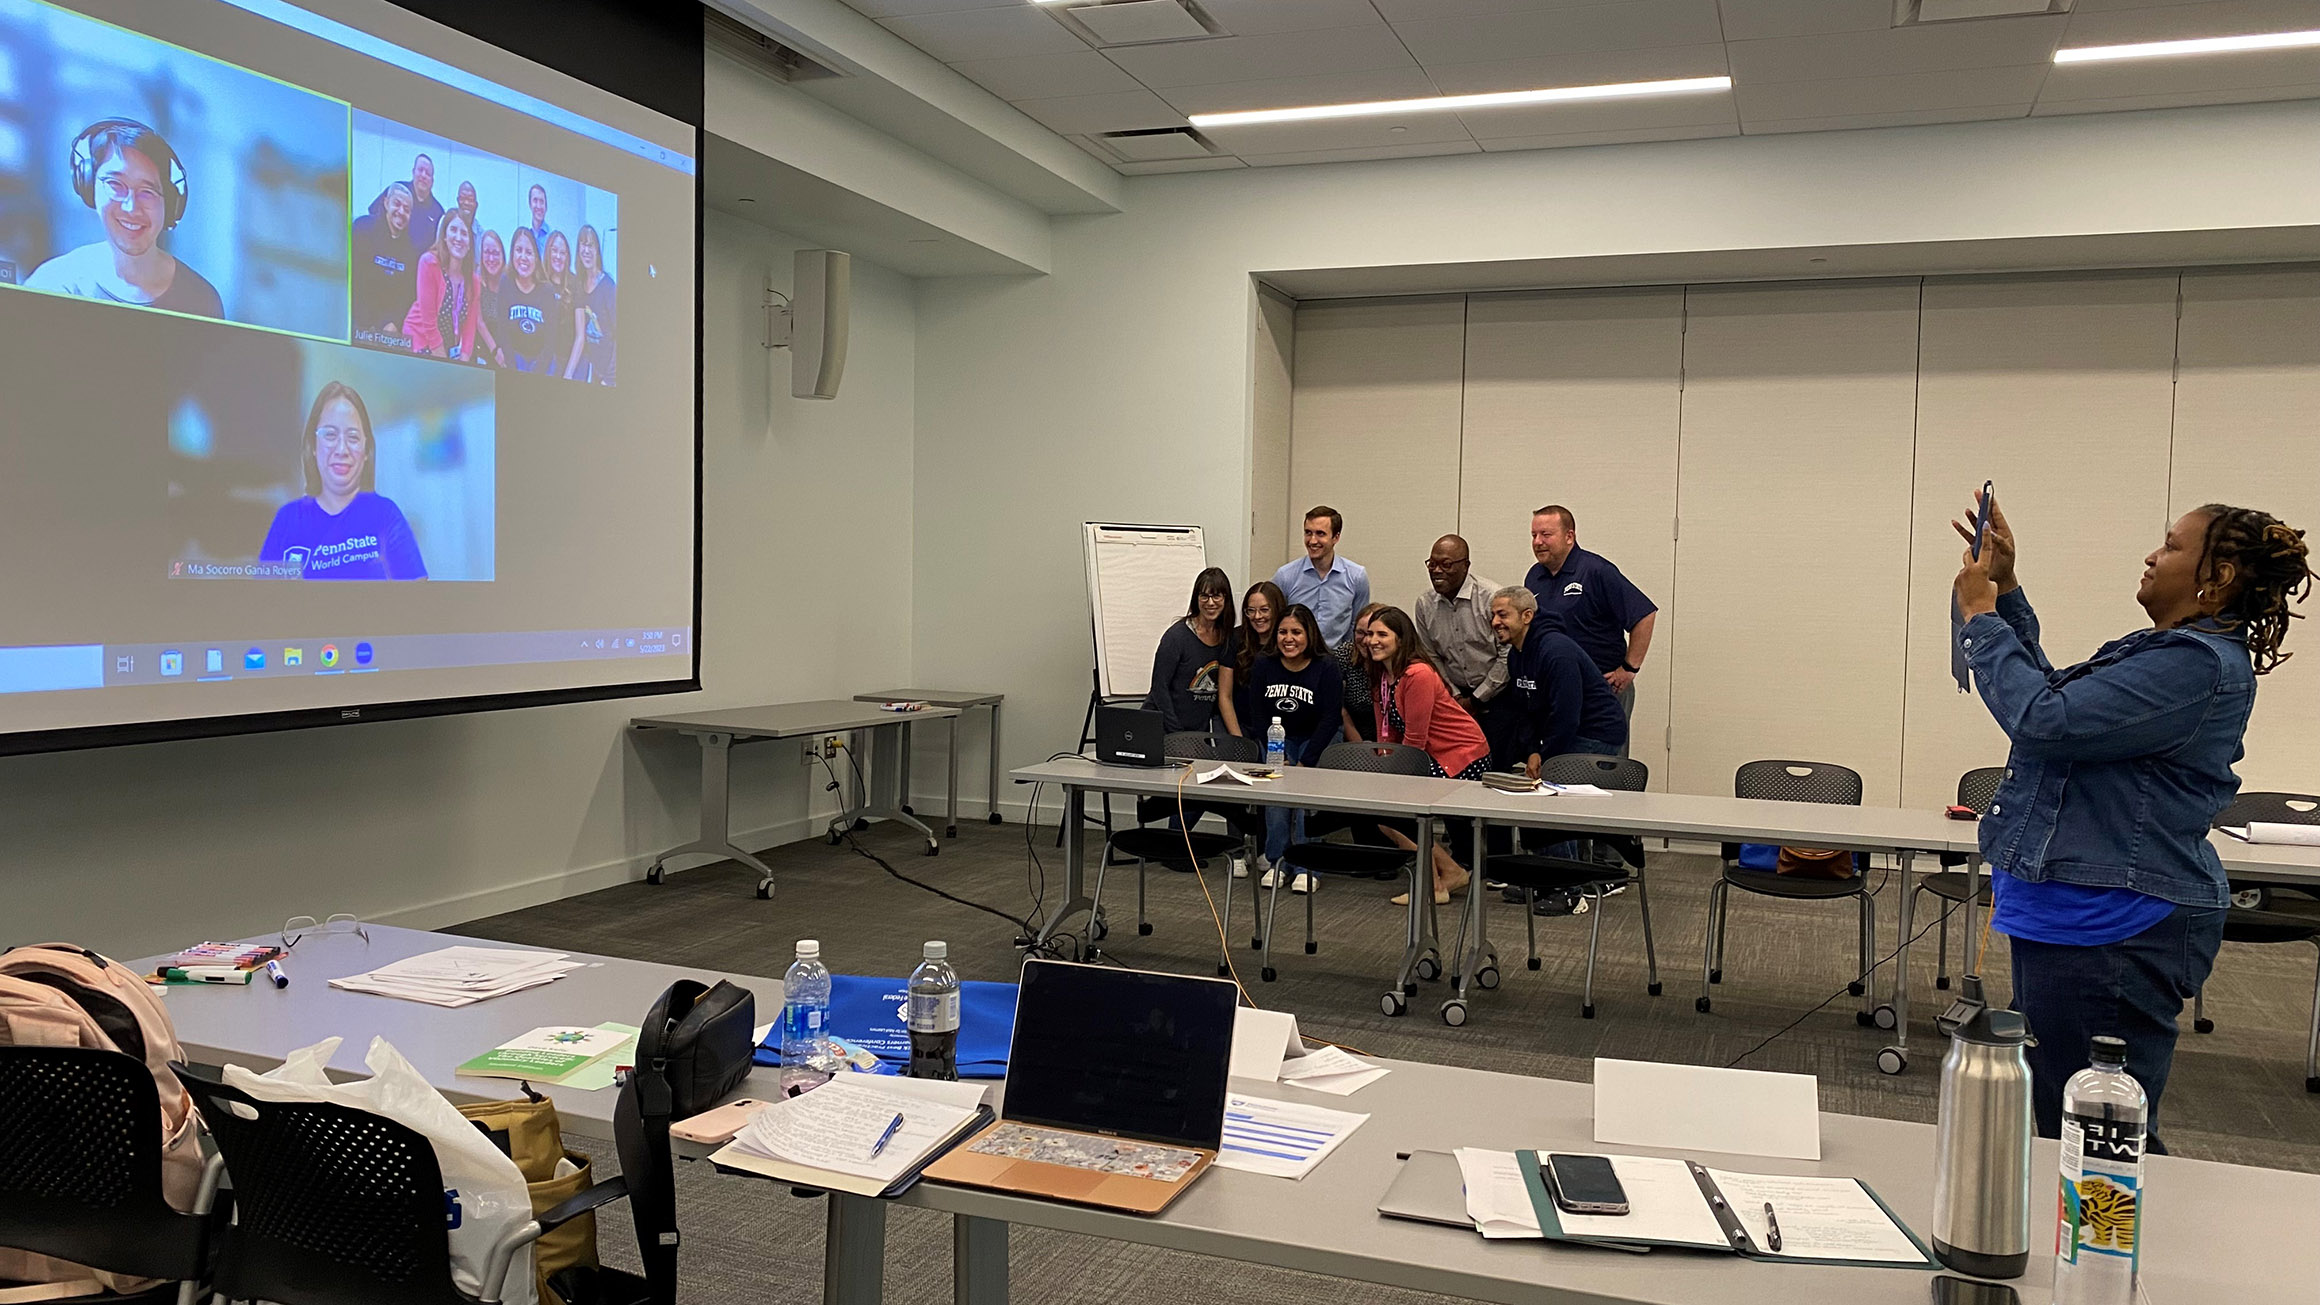 The attendees of the retreat posed for a photo by getting in front of the web cam of a laptop while someone takes a photo of the projection screen.